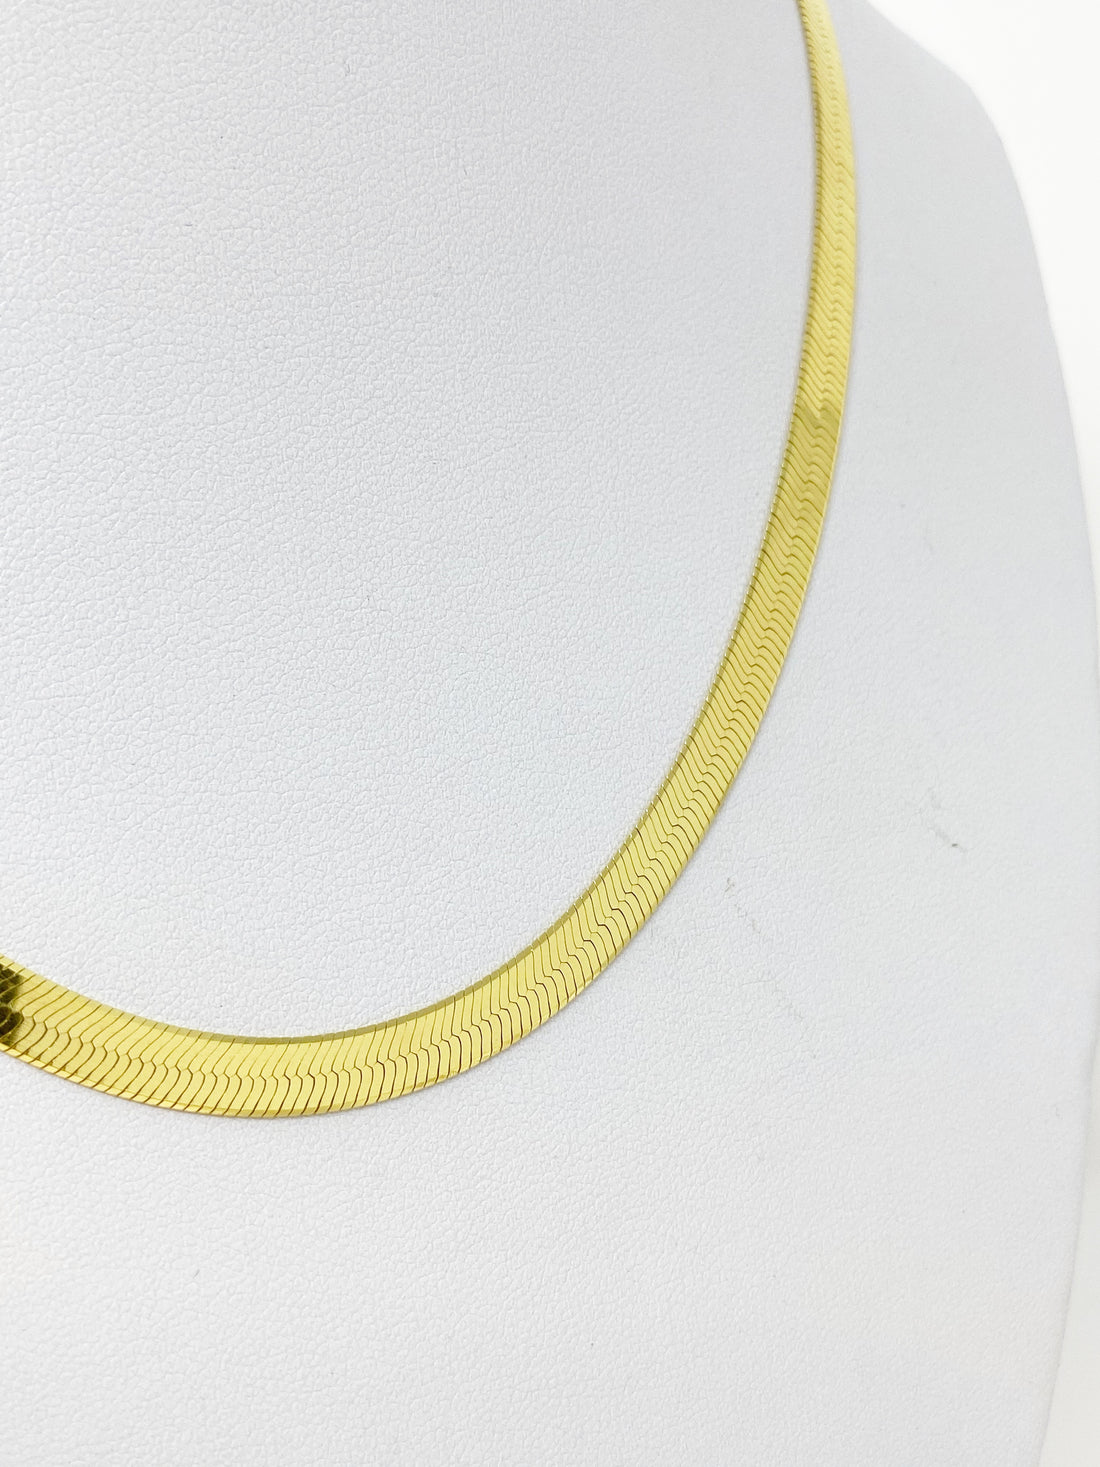 Slither Gold Necklaceu